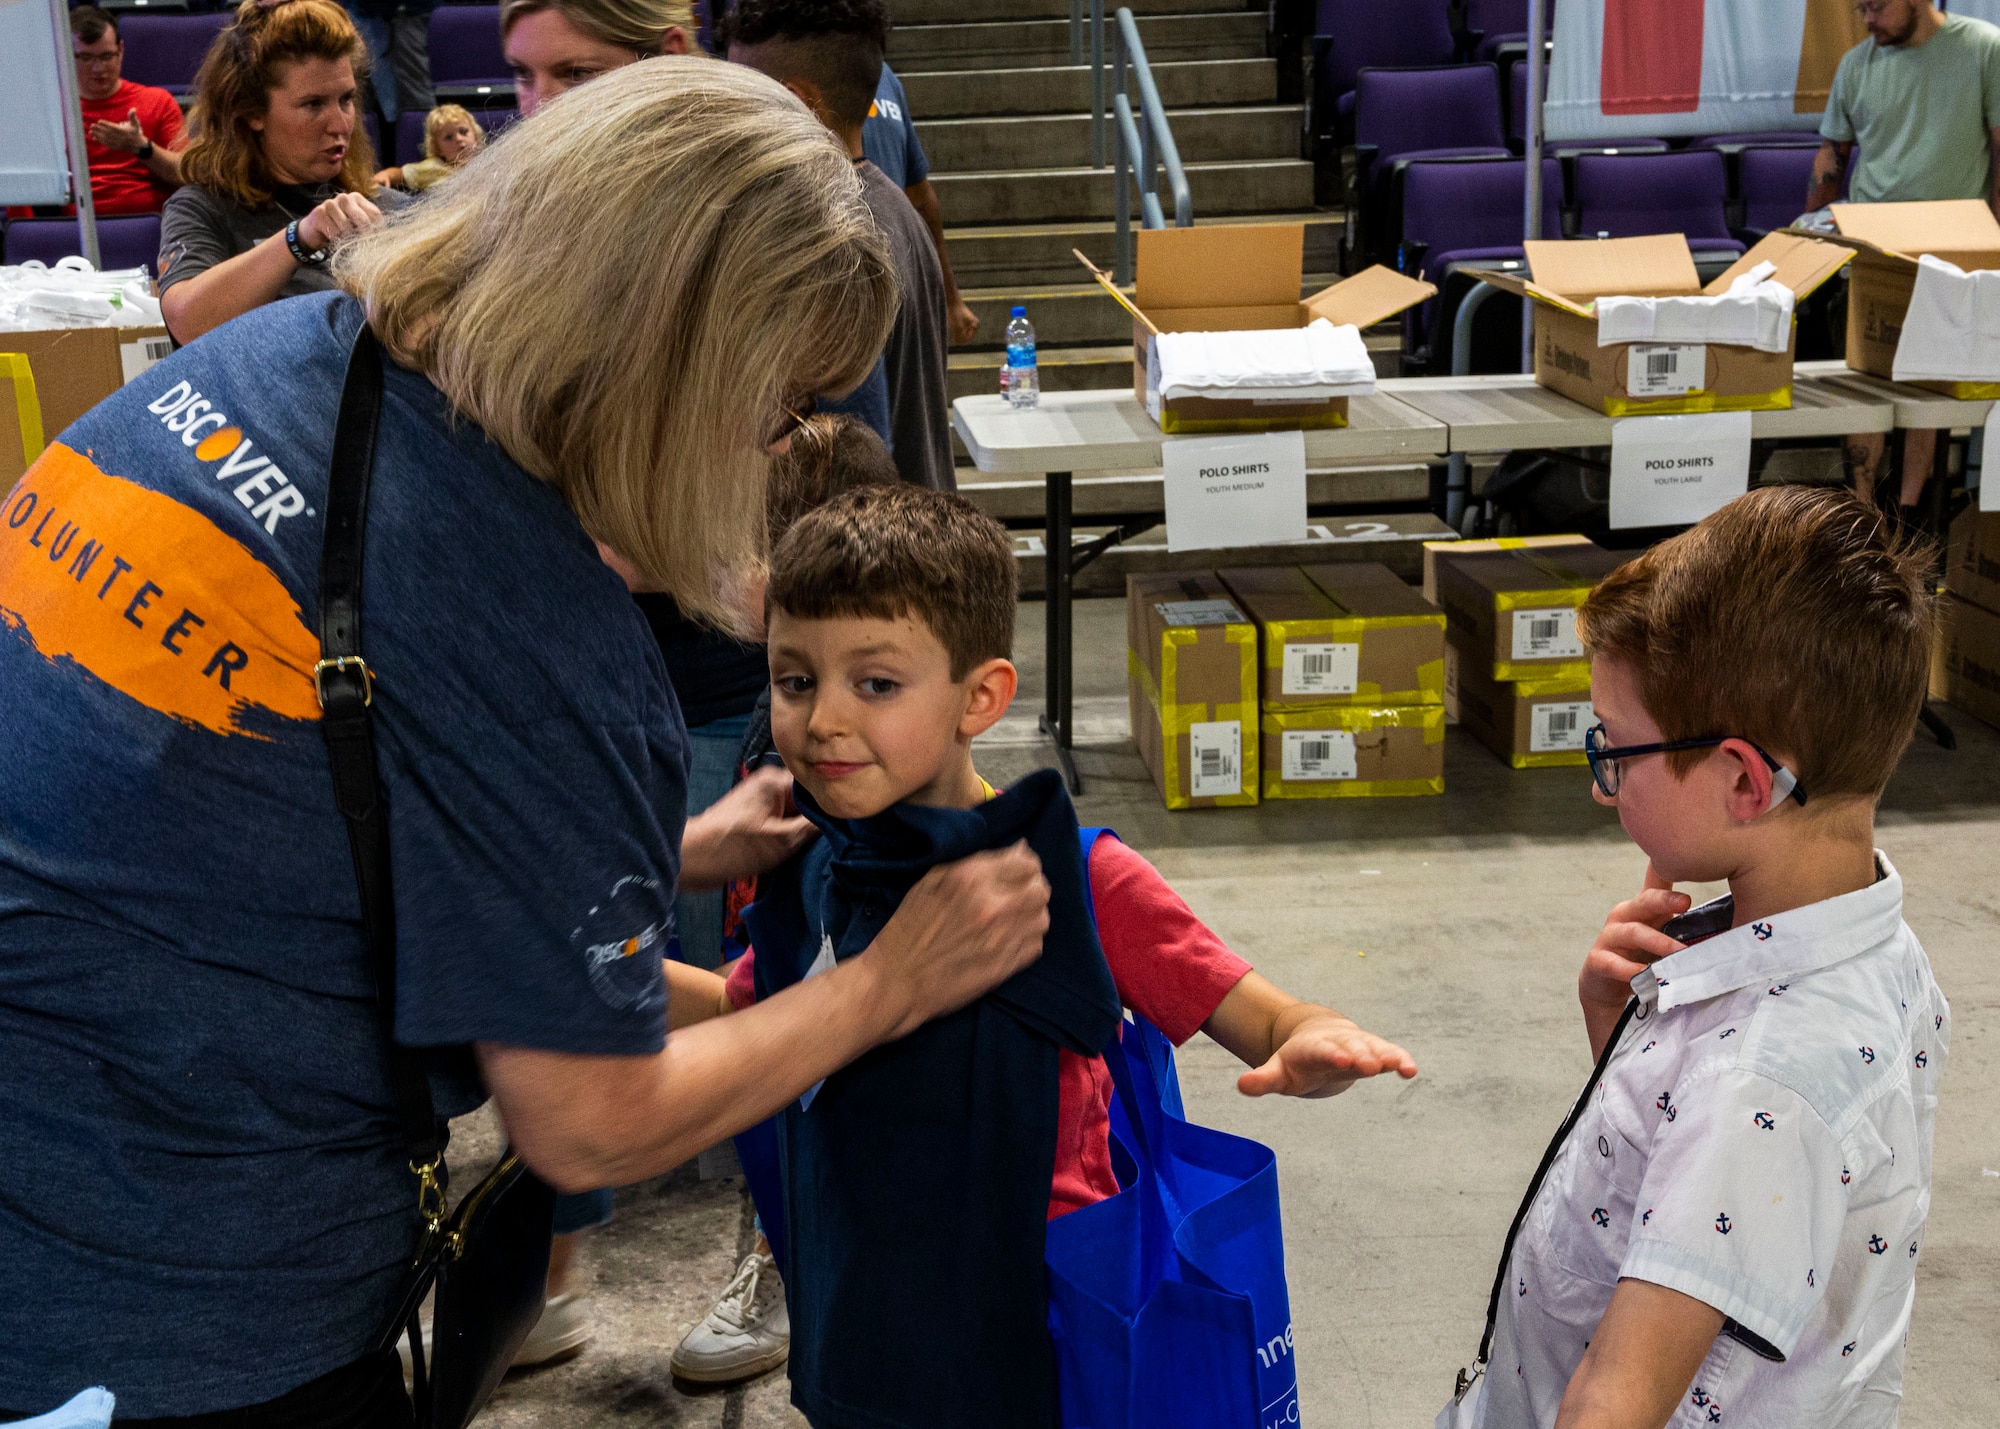 Two future students are fitted for new clothes by a volunteer at the Back to School Bash event July 20, 2022, at Grand Canyon University, Phoenix, Arizona.